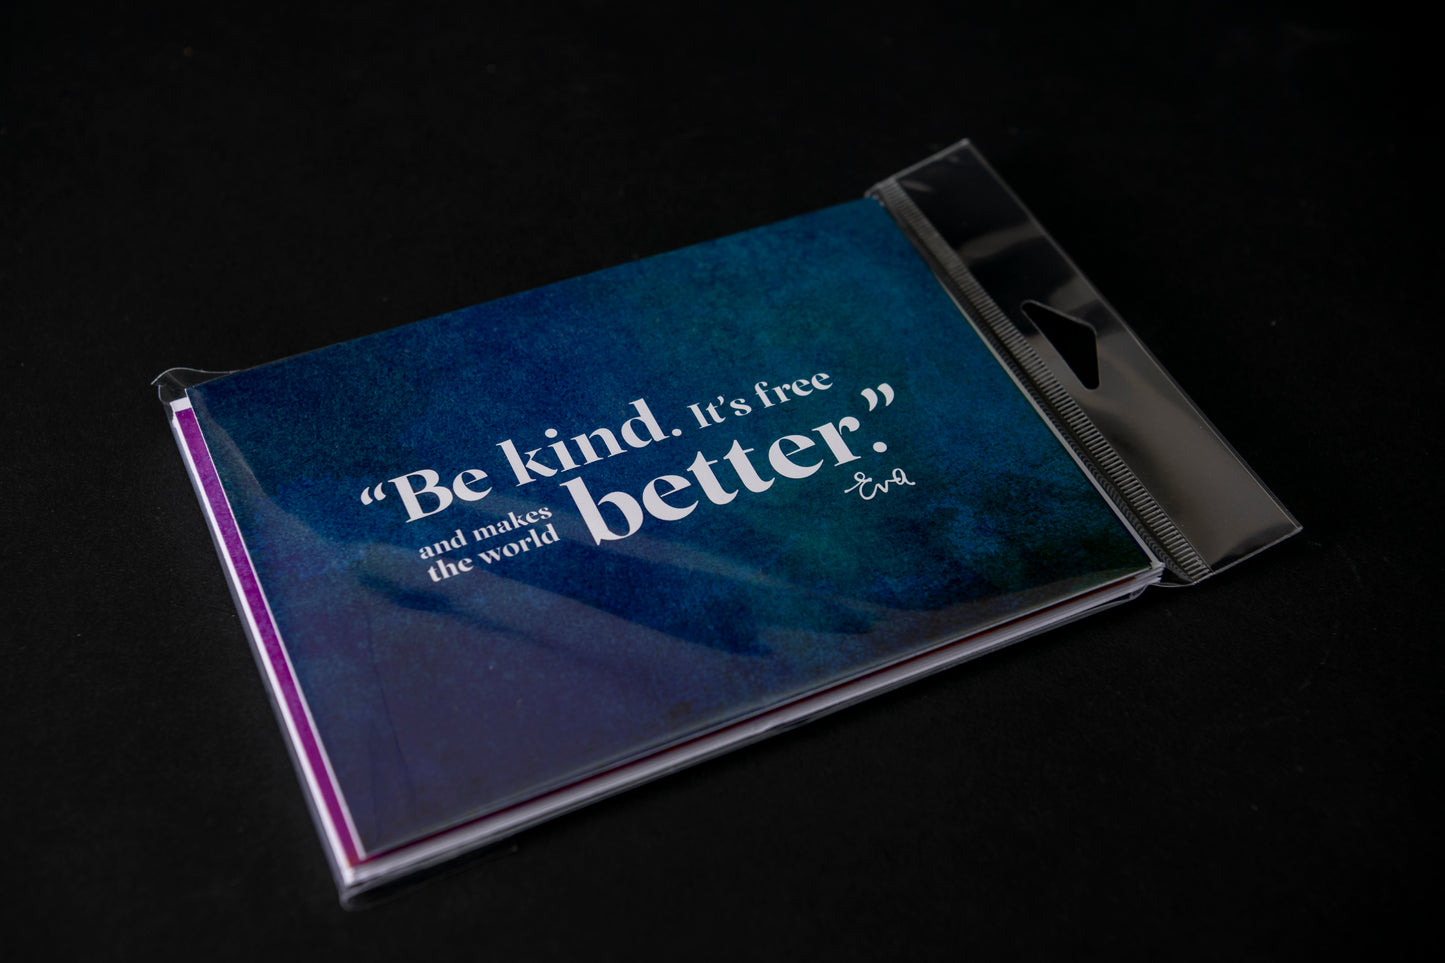 Notecard Set "Be Kind. It's Free and Makes the World Better."- Eva Kor